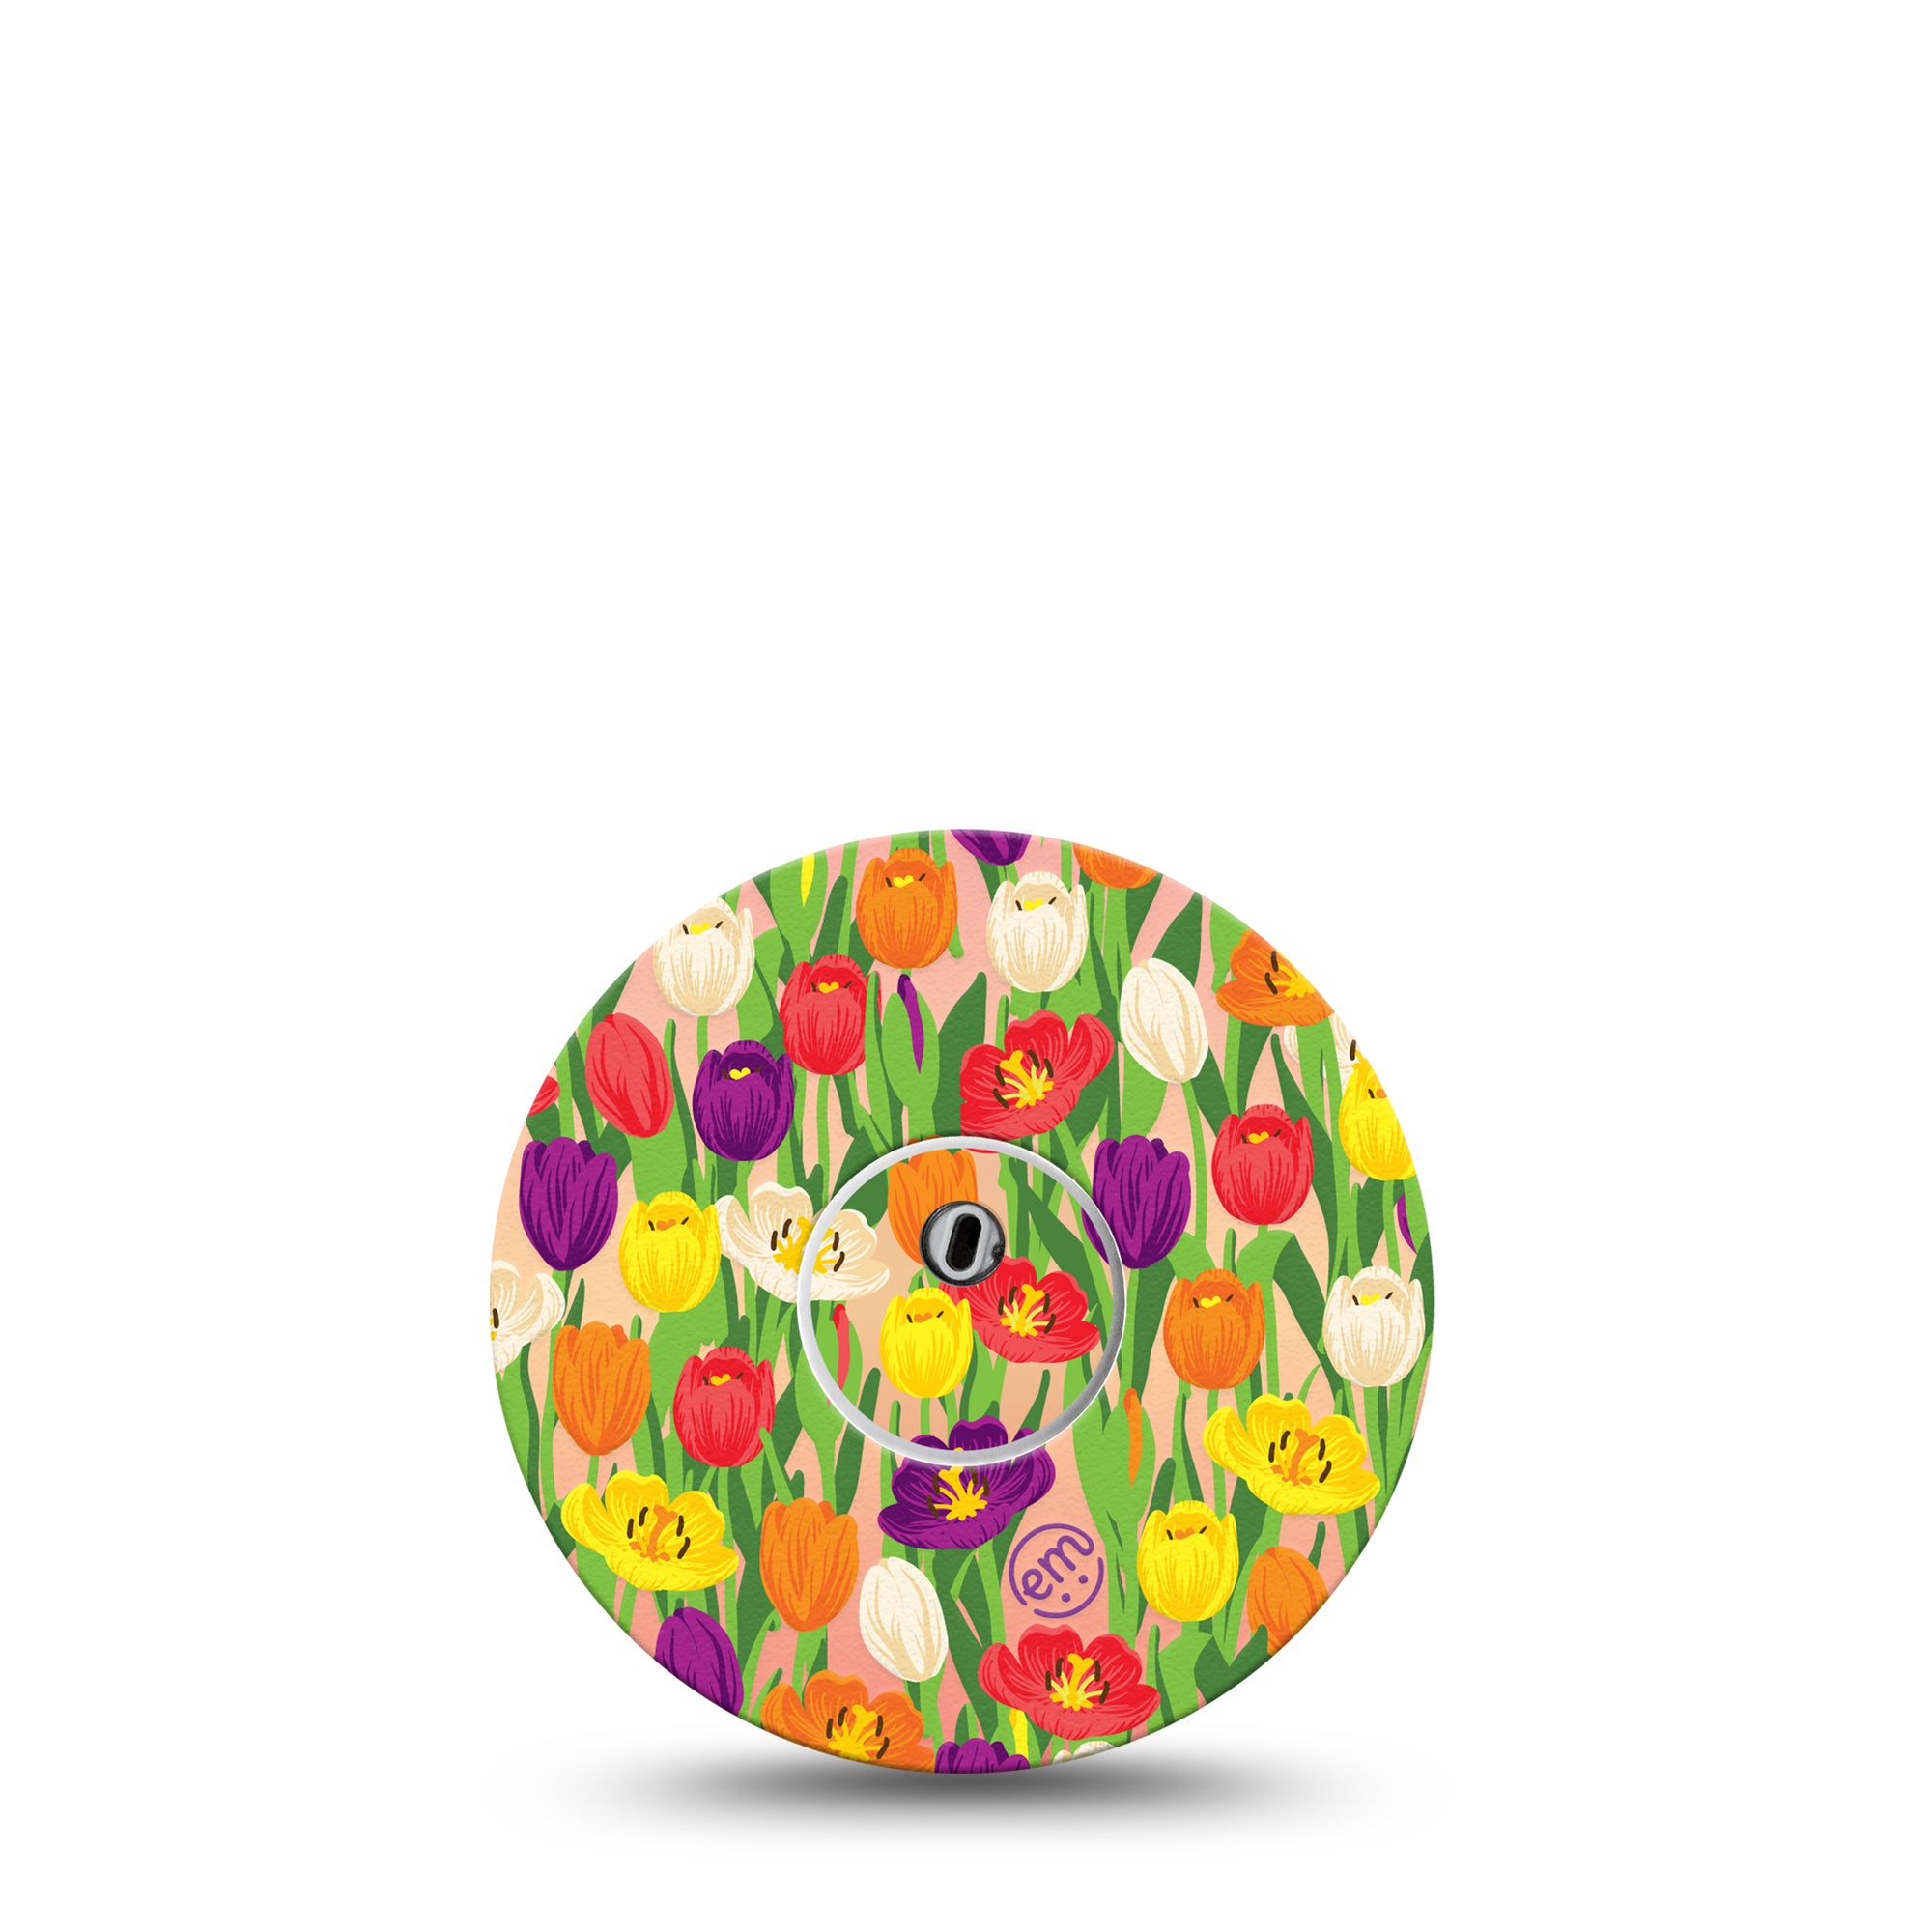 Tulips Libre 3 Transmitter Sticker, Single, Bright Colored Tulips Vinyl Sticker with Matching Libre 3 Plaster Patch